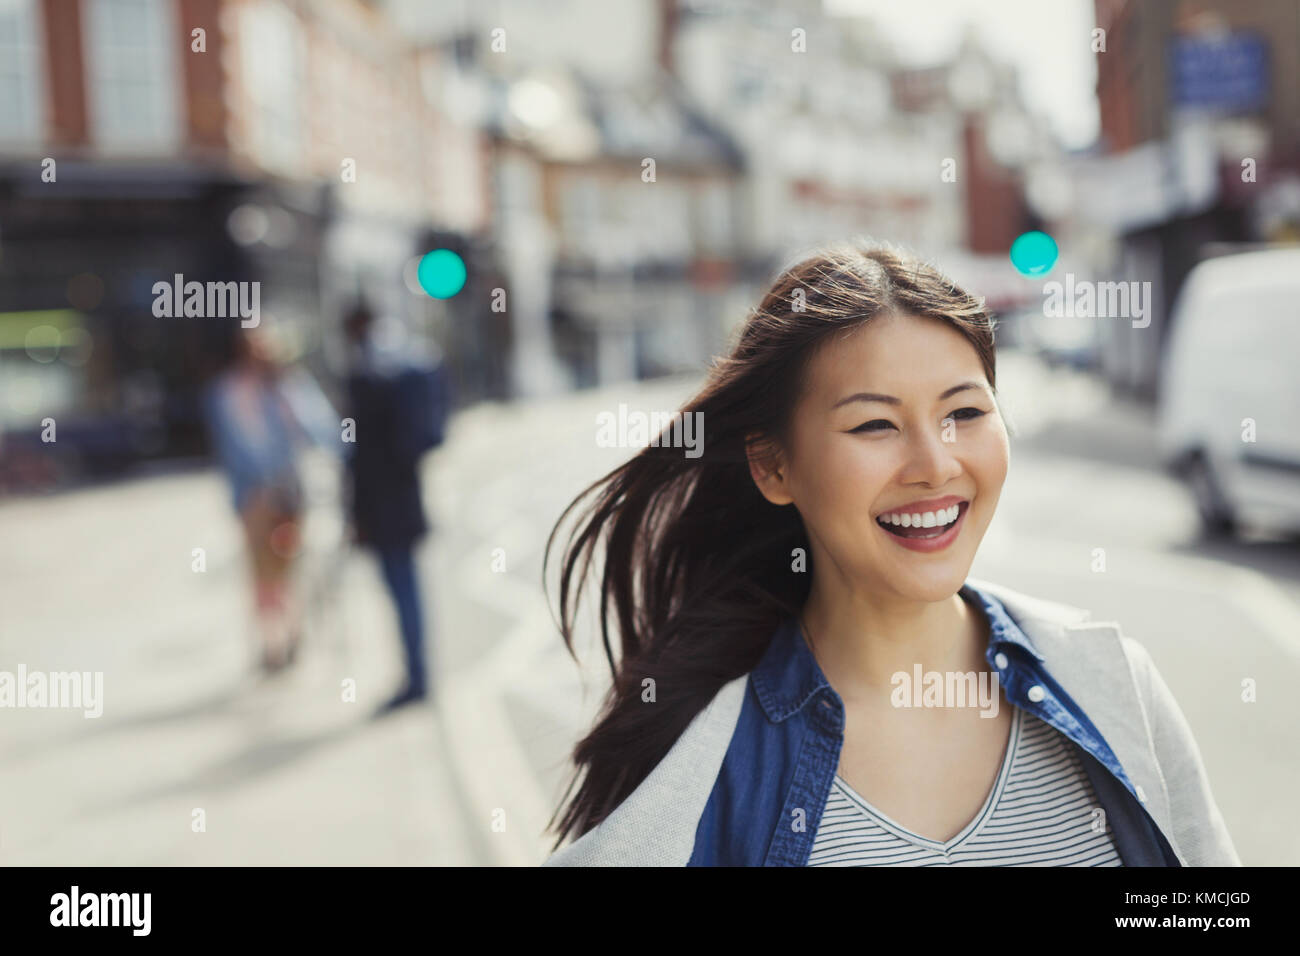 Smiling, enthusiastic young woman walking on sunny urban street Stock Photo